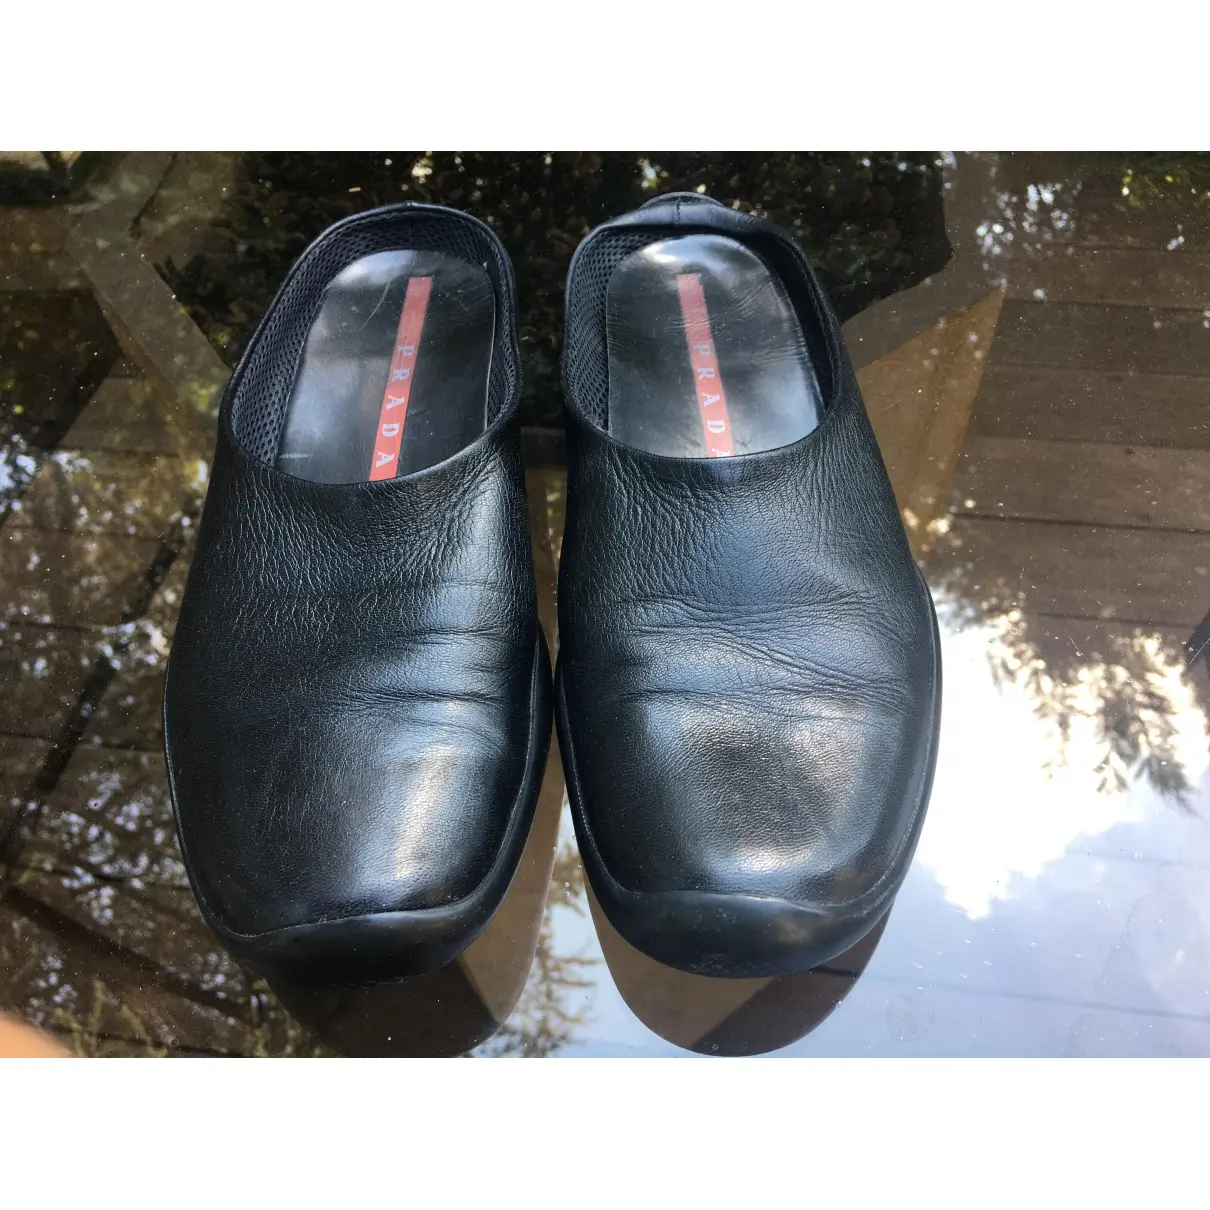 Prada Leather mules & clogs for sale - Vintage